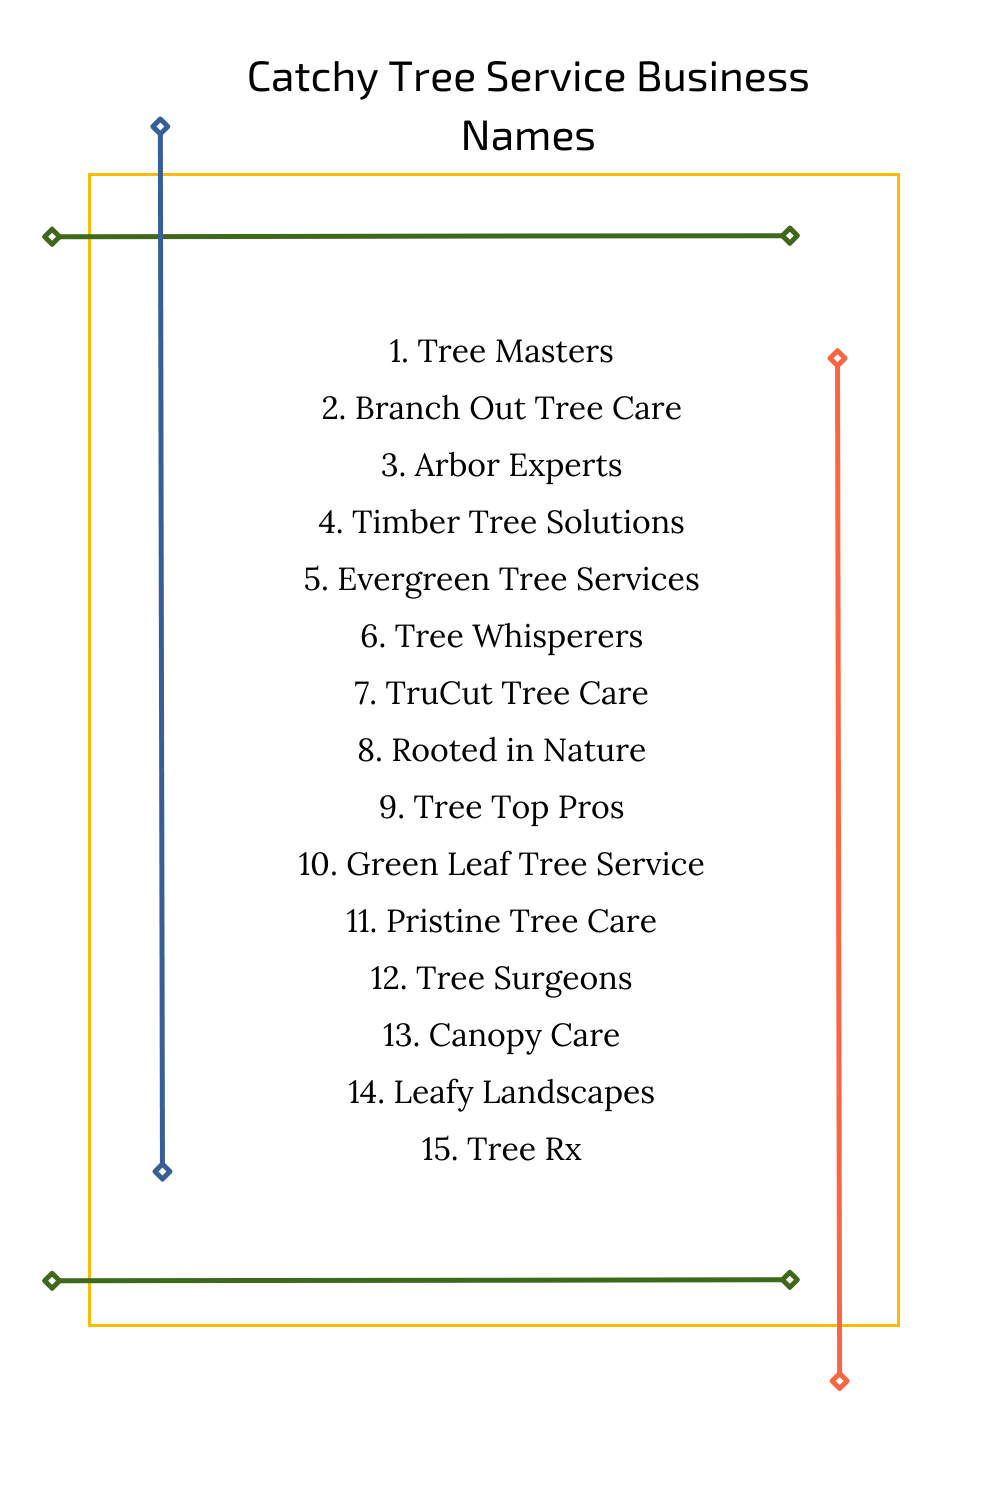 Catchy Tree Service Business Names